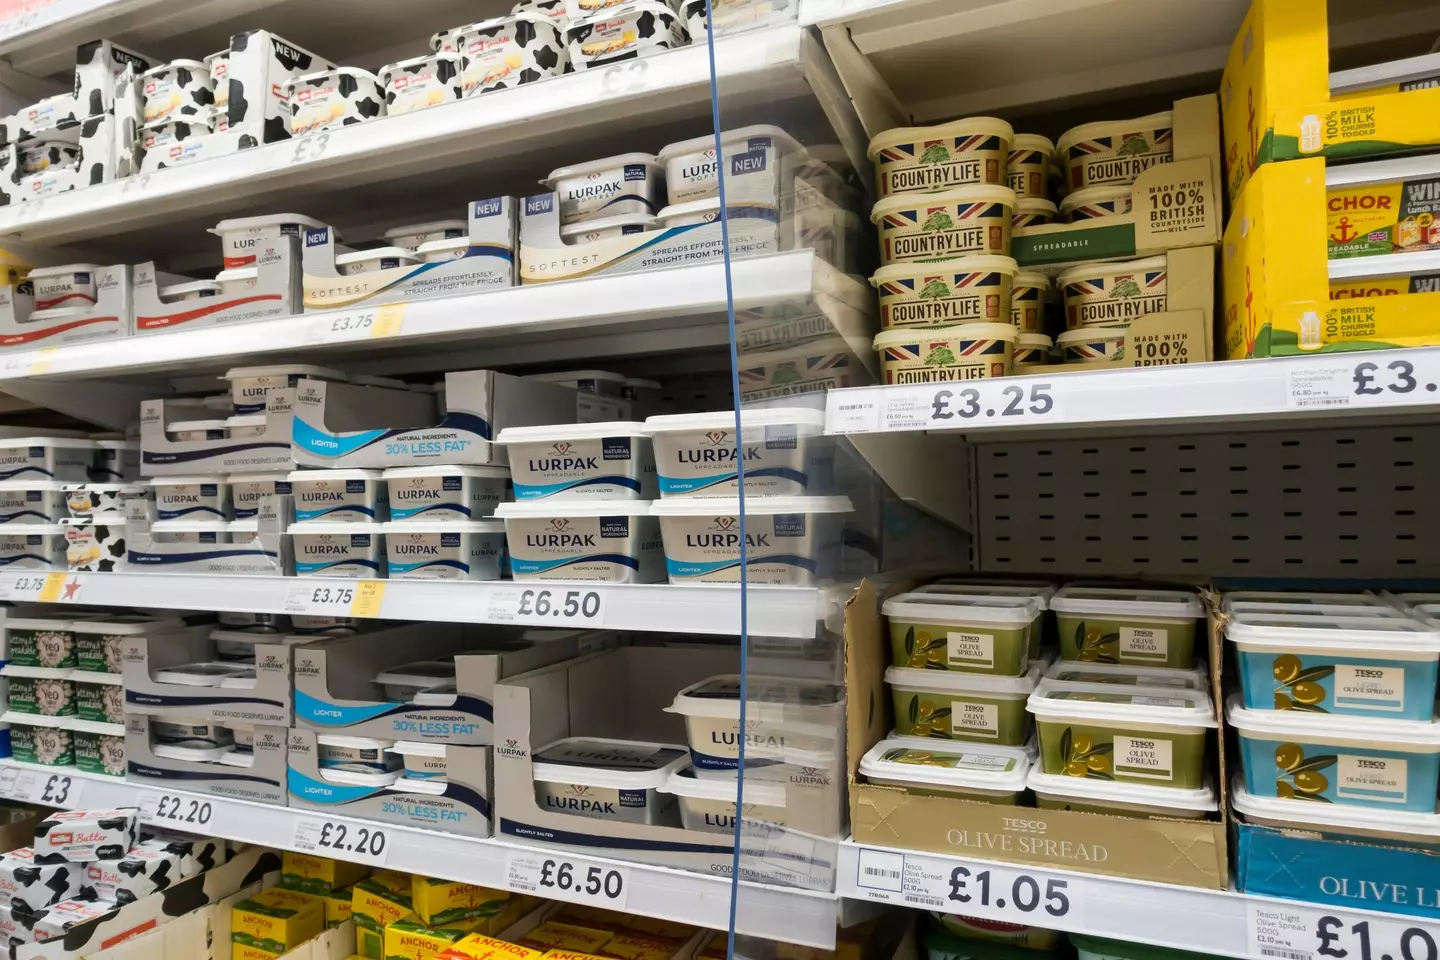 Shoppers have been left shocked as the price of butter has hit more than £7 in a popular UK supermarket.